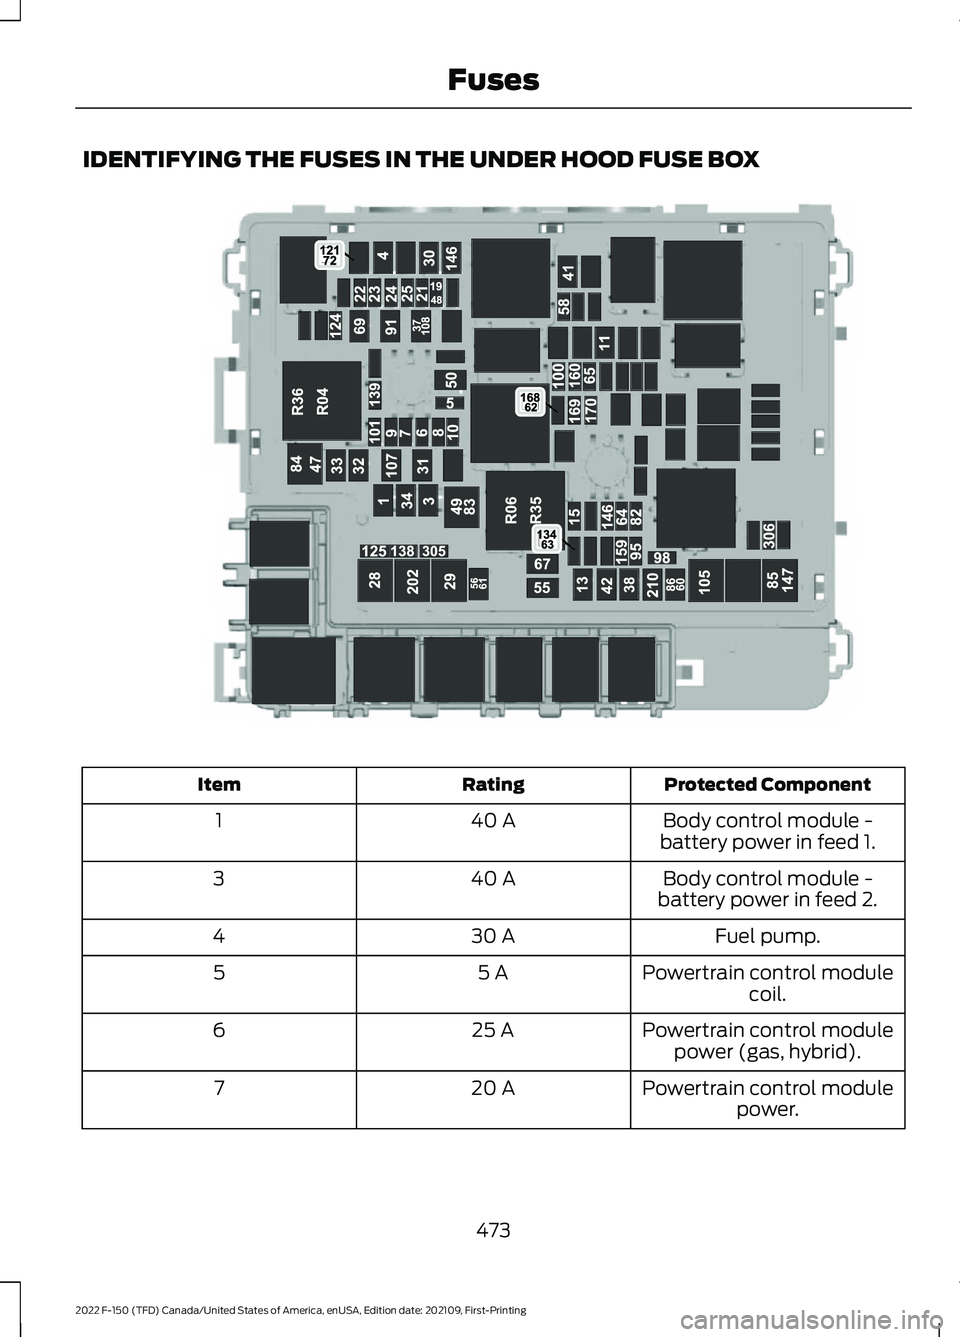 FORD F-150 2022  Owners Manual IDENTIFYING THE FUSES IN THE UNDER HOOD FUSE BOX
Protected Component
Rating
Item
Body control module -
battery power in feed 1.
40 A
1
Body control module -
battery power in feed 2.
40 A
3
Fuel pump.
